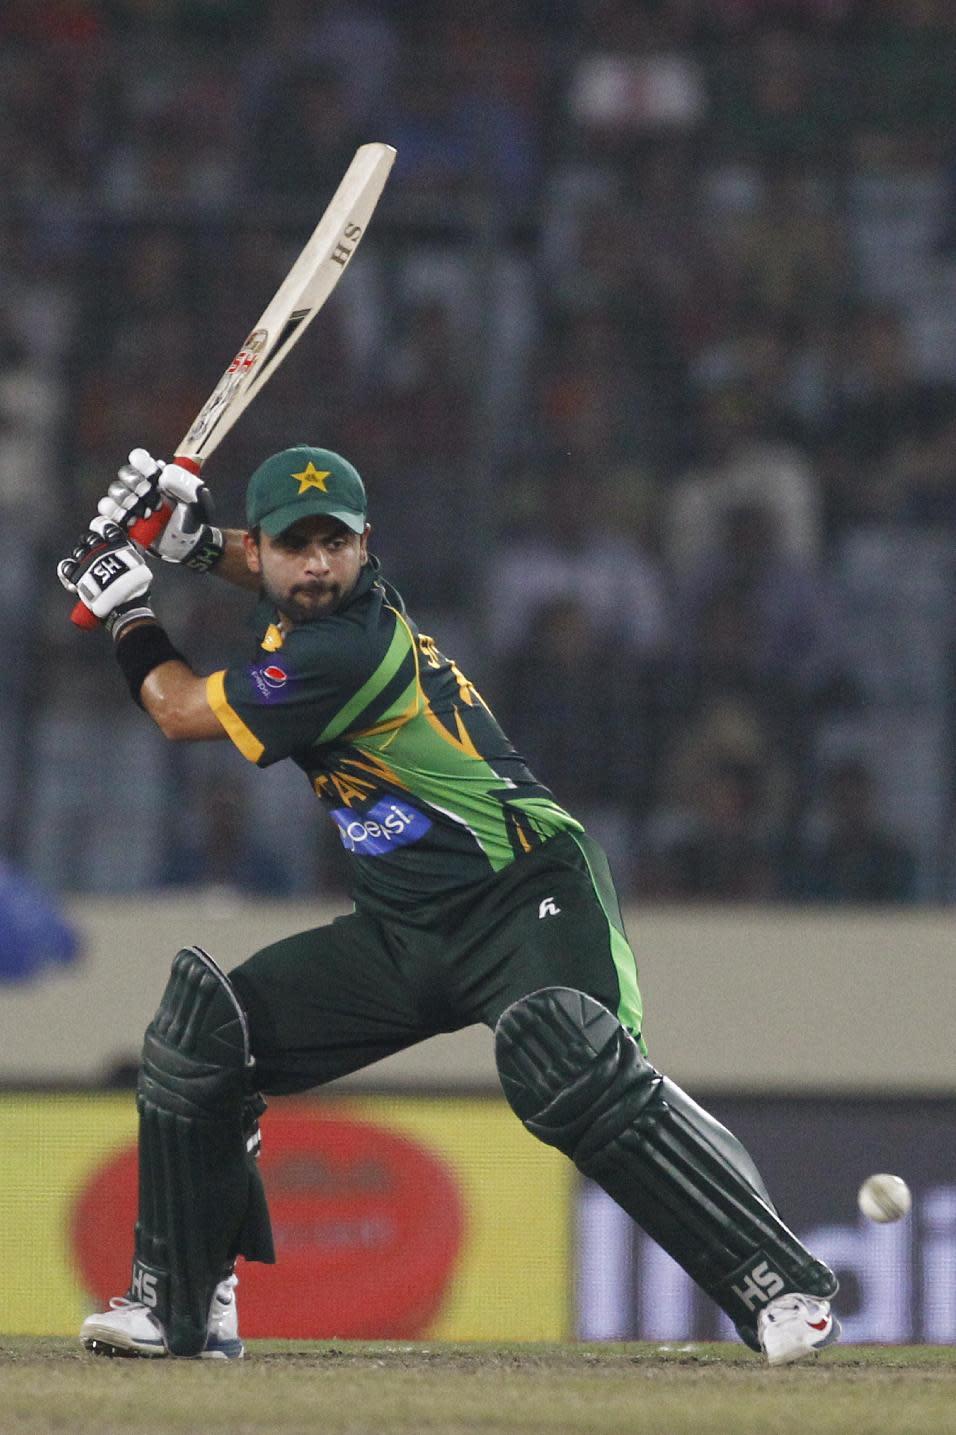 Pakistan’s Ahmed Shehzad plays a shot during their match against Bangladesh in the Asia Cup one-day international cricket tournament in Dhaka, Bangladesh, Tuesday, March 4, 2014. (AP Photo/A.M. Ahad)